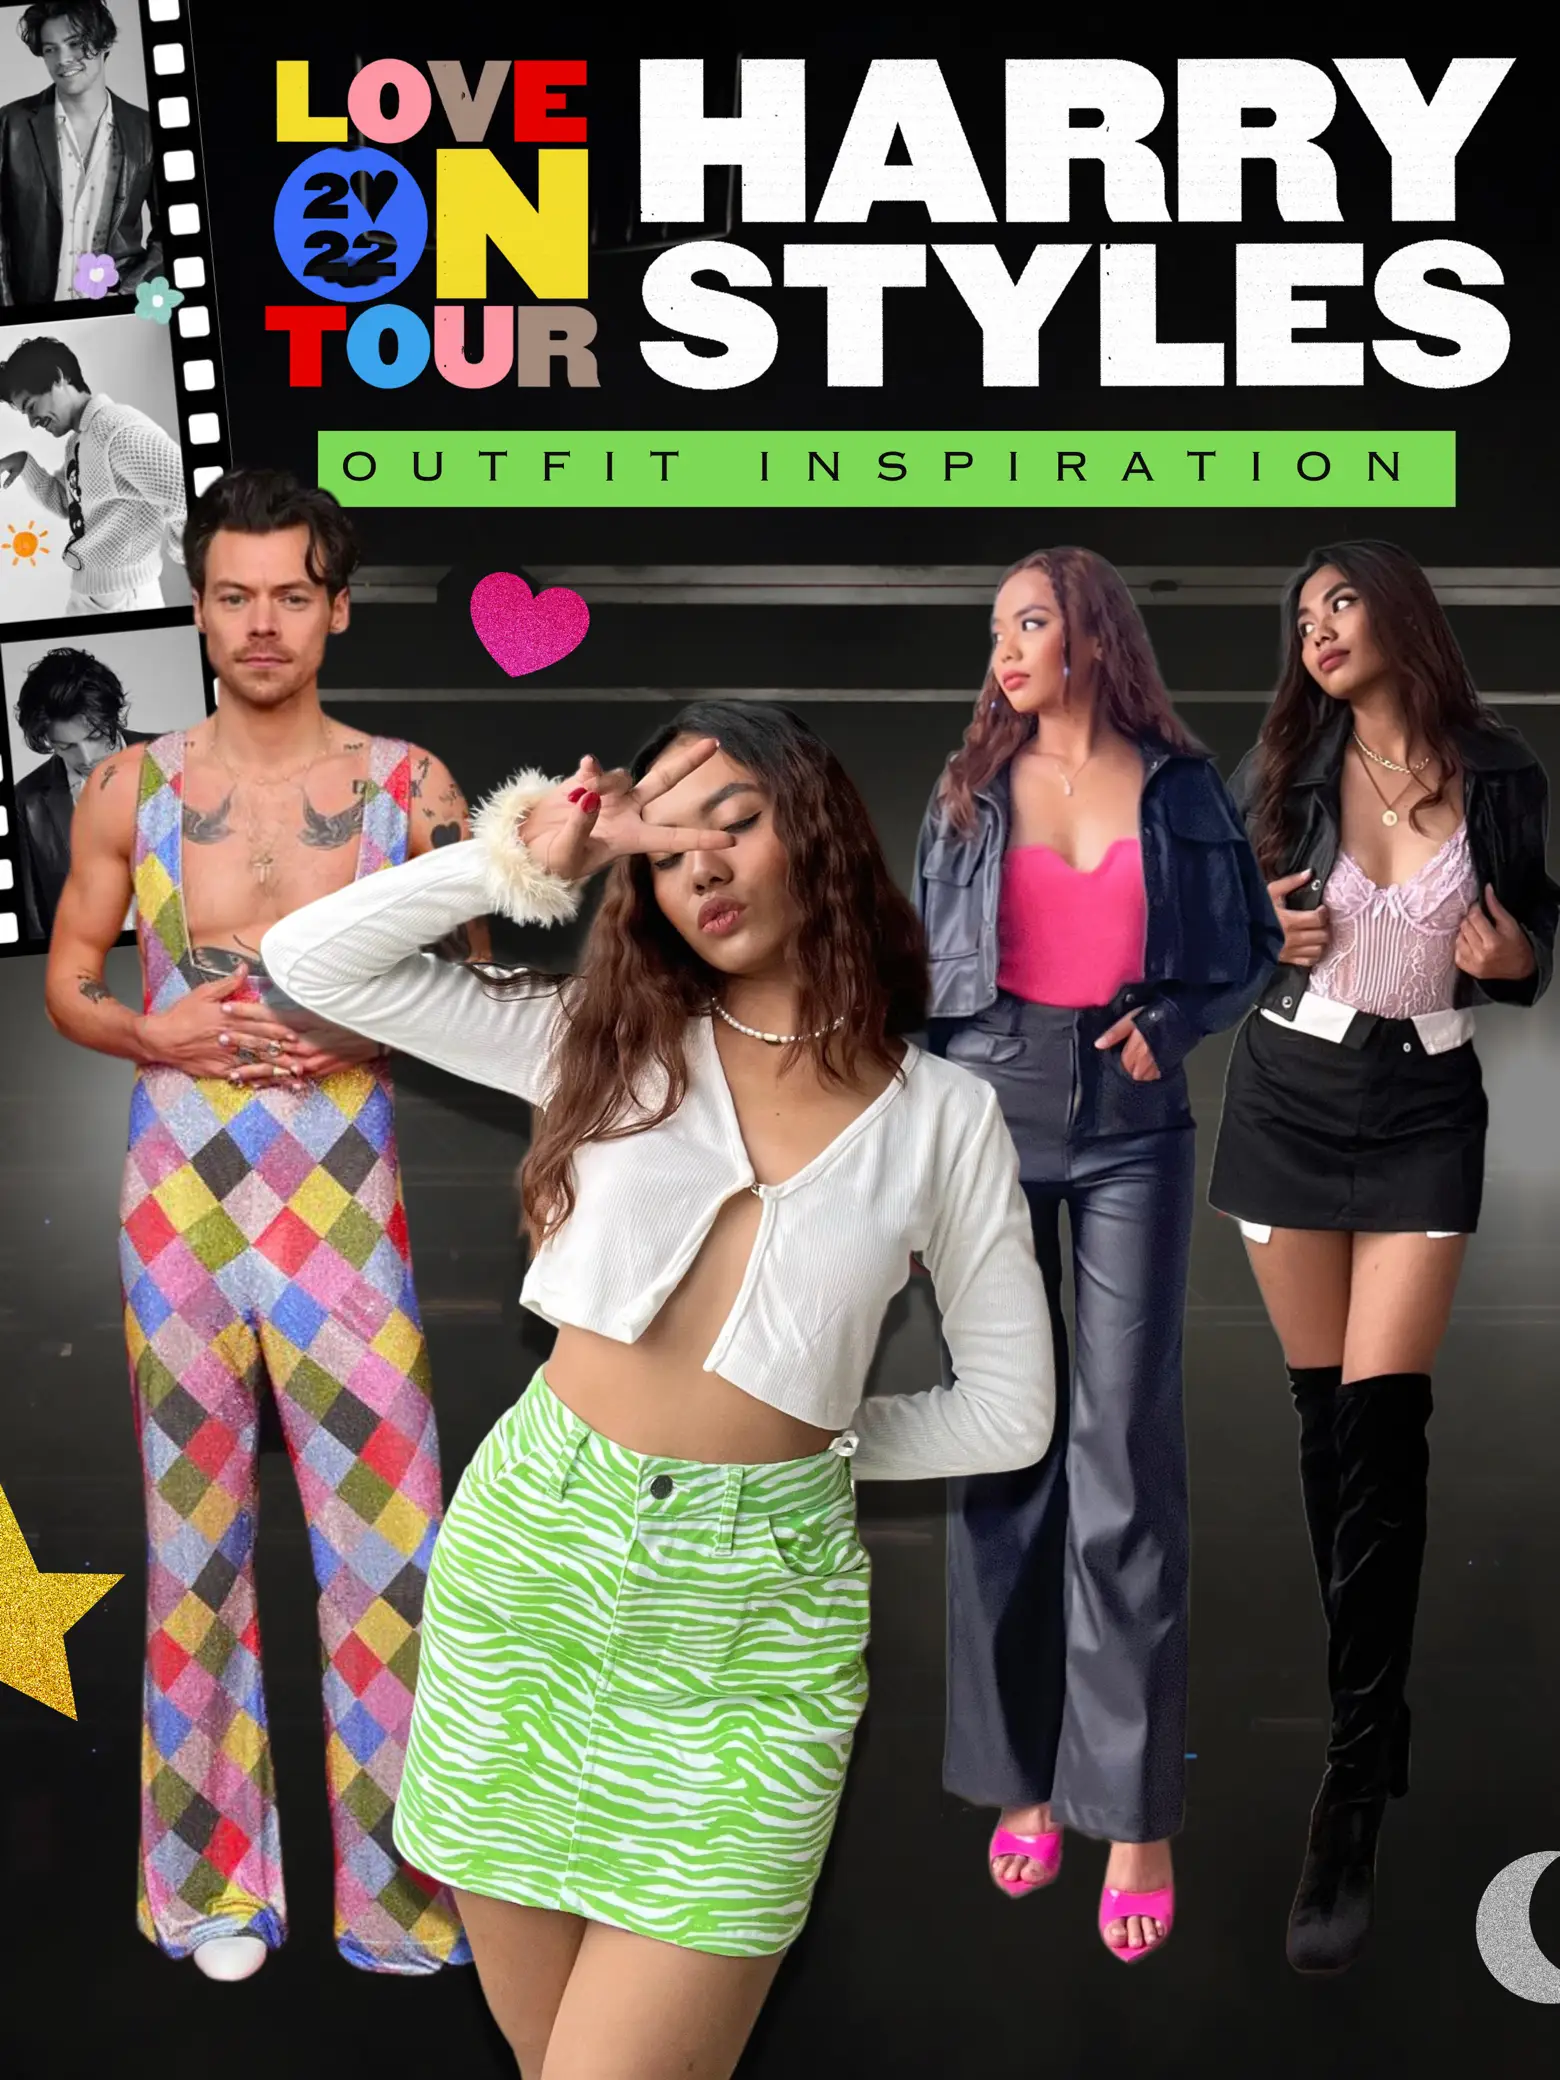 Harry's Styles: Outfit Inspiration for Love on Tour